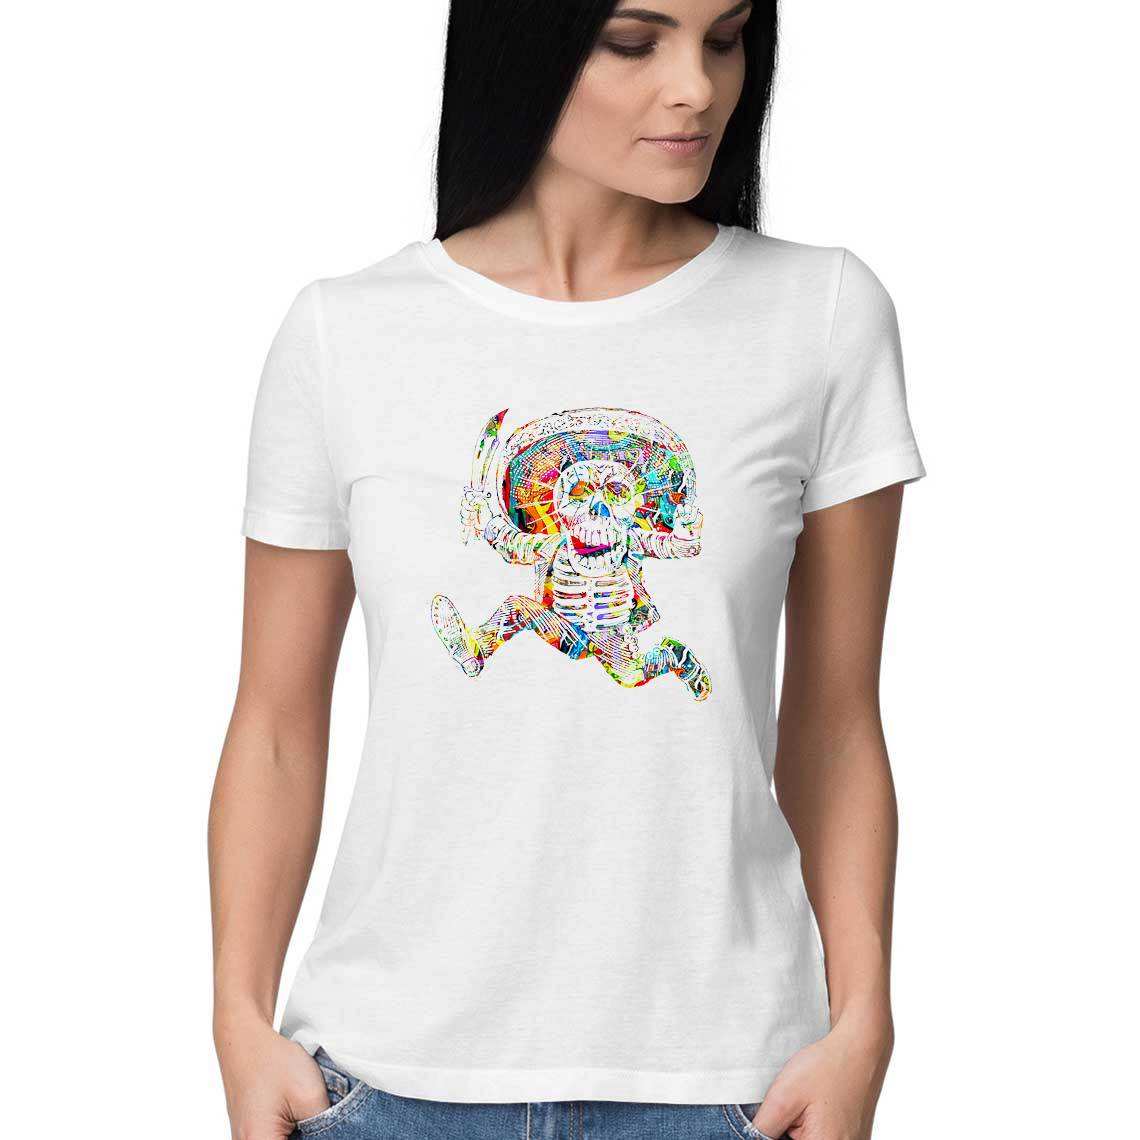 The Pirate of the Indus Dream Women's T-Shirt - CBD Store India